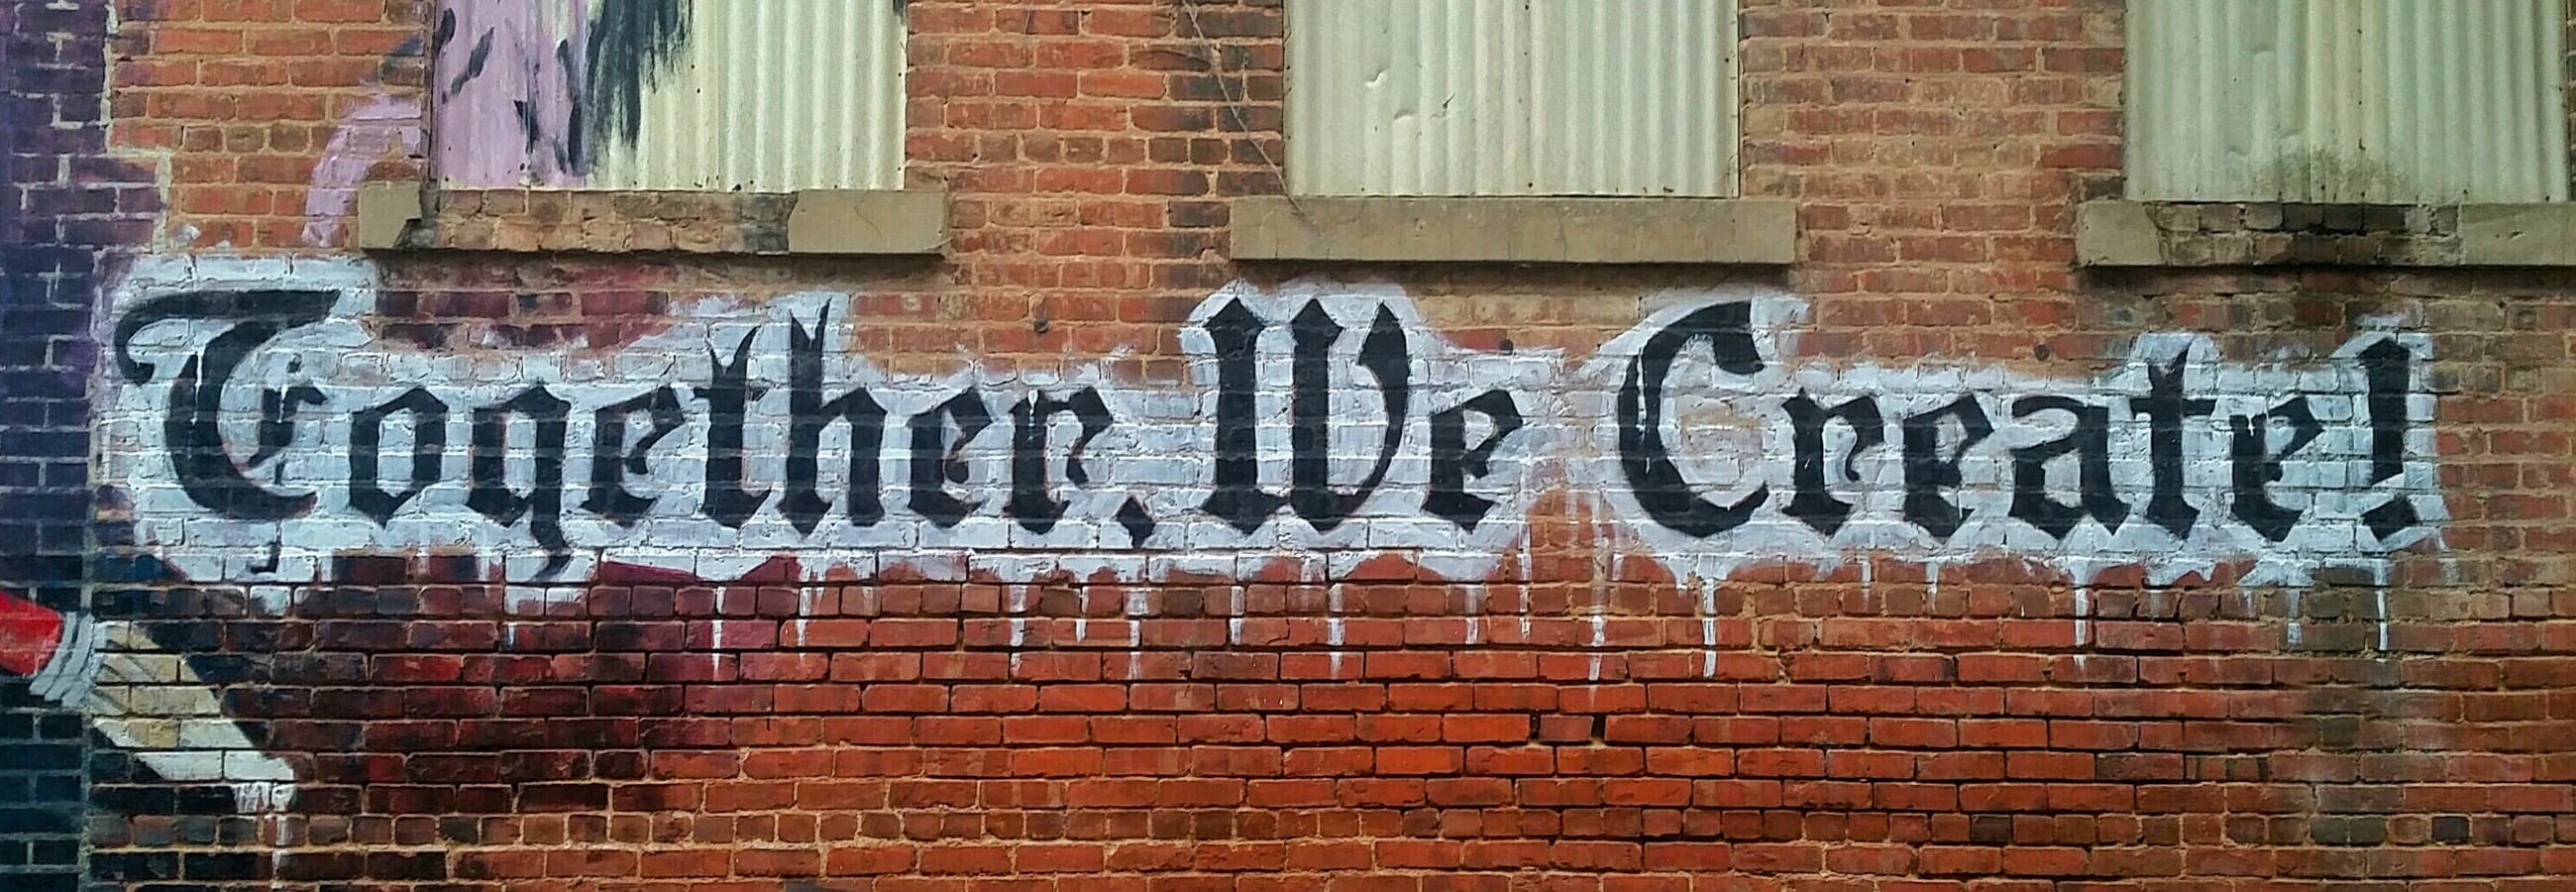 Graffiti on a brick wall that says together we create.